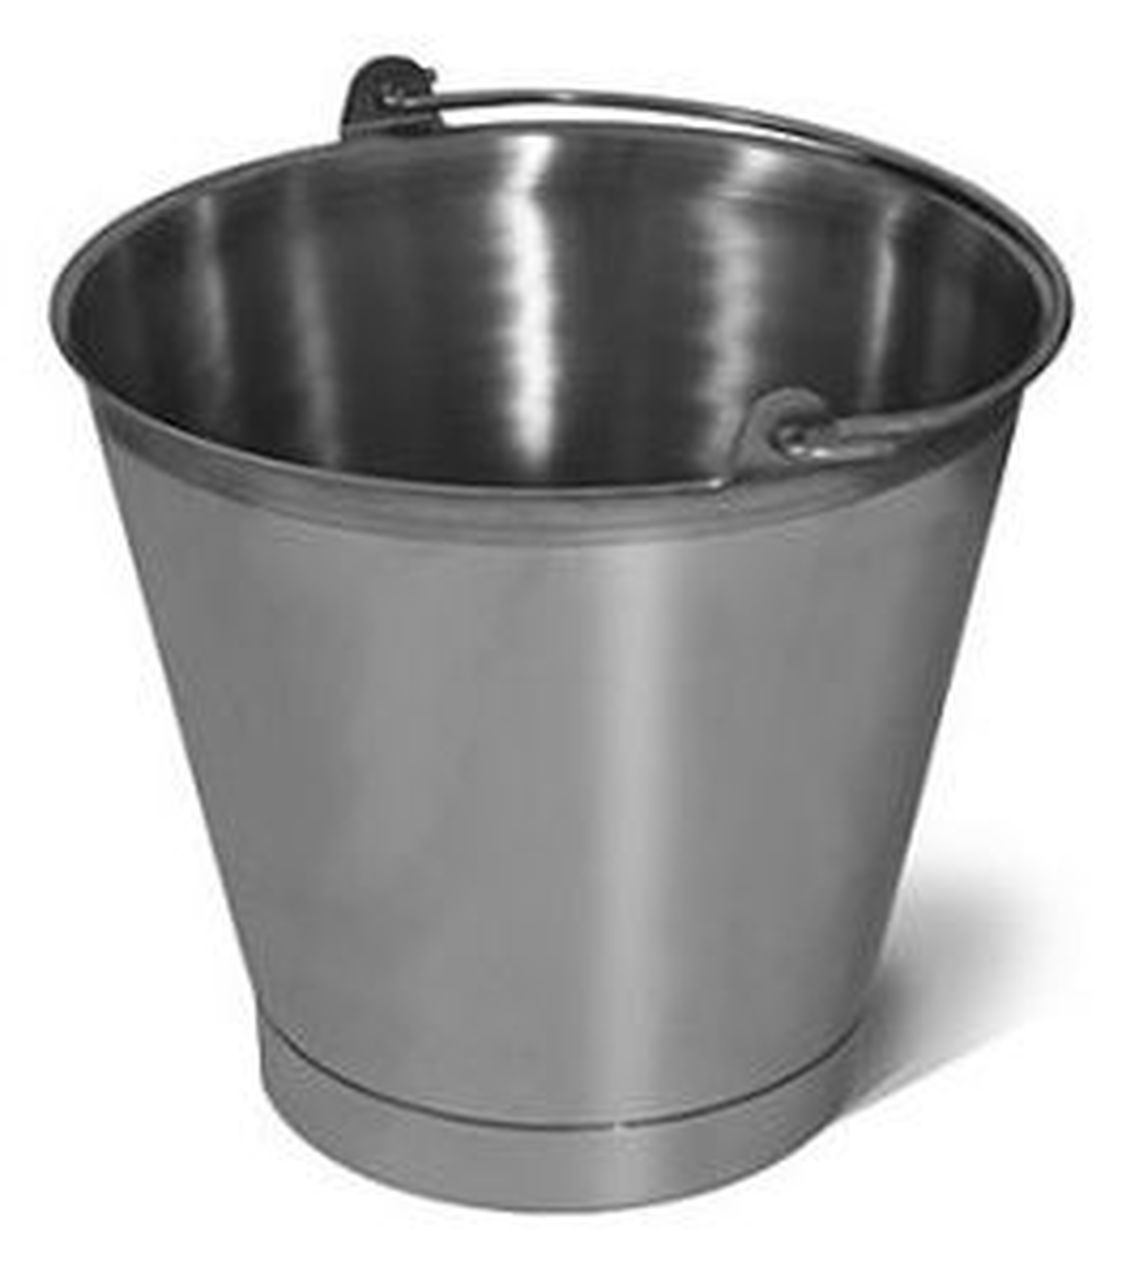 Industrial Buckets and Pails for Cleaning and Material Handling